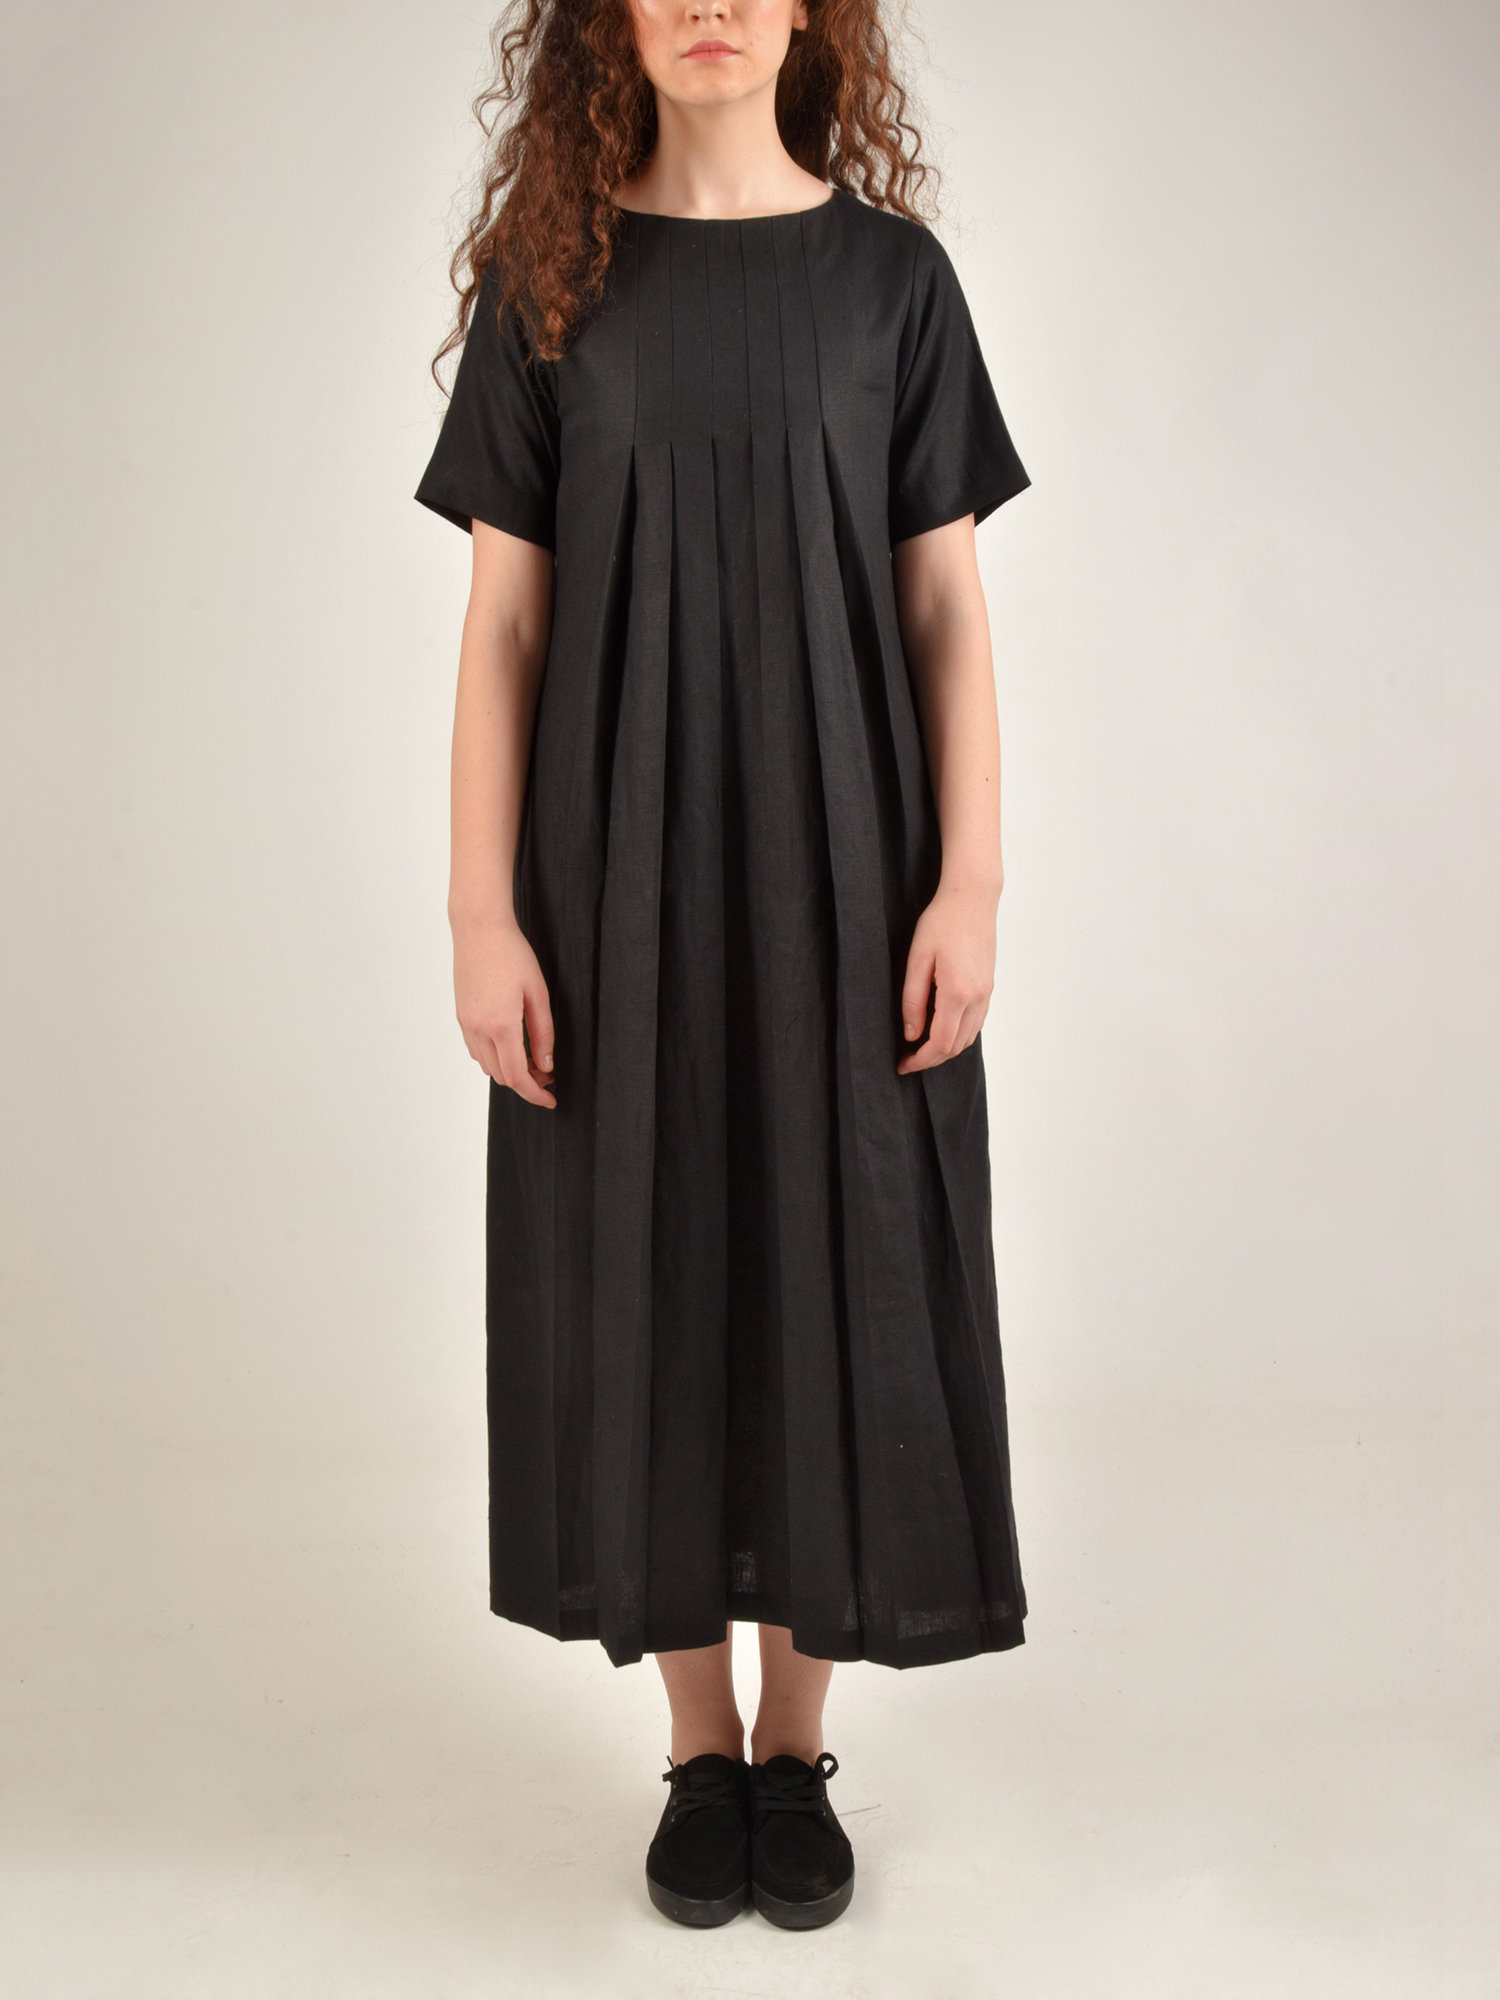 Linen Front Pleated Black Dress by Turn Black - Mad Woman